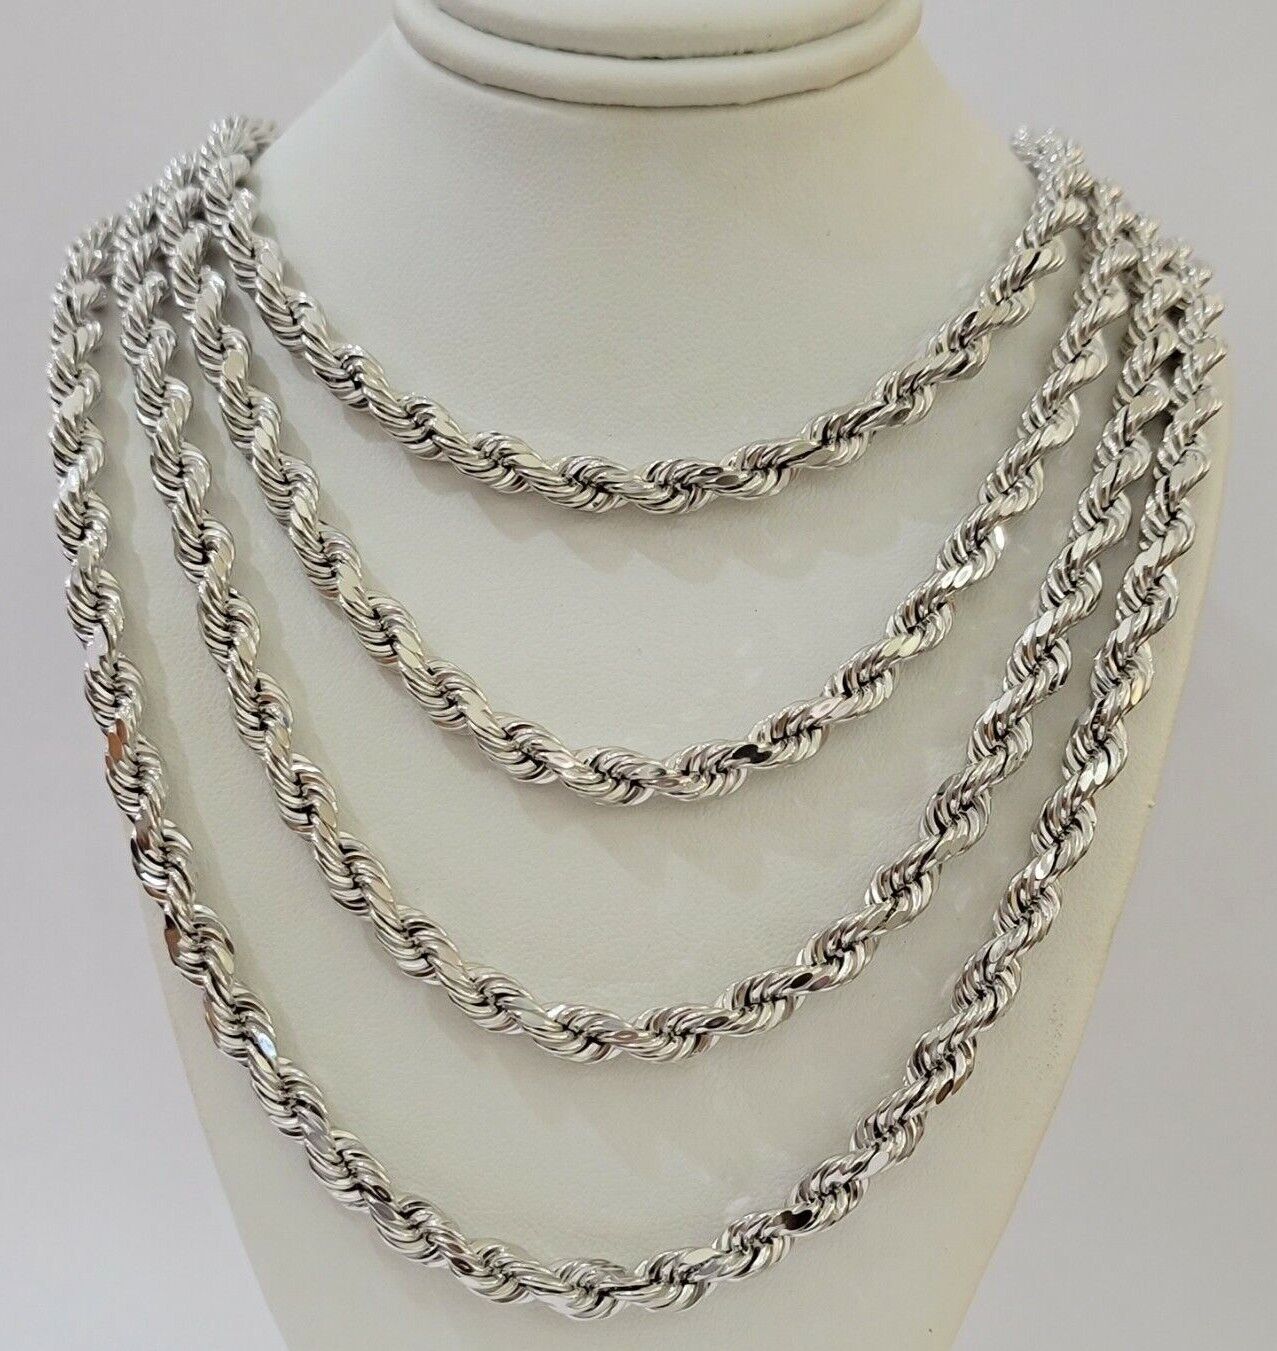 Real 10k White Gold Rope Chain Necklace 22 Inch 6mm Diamond Cuts Mens 10KT SOLID